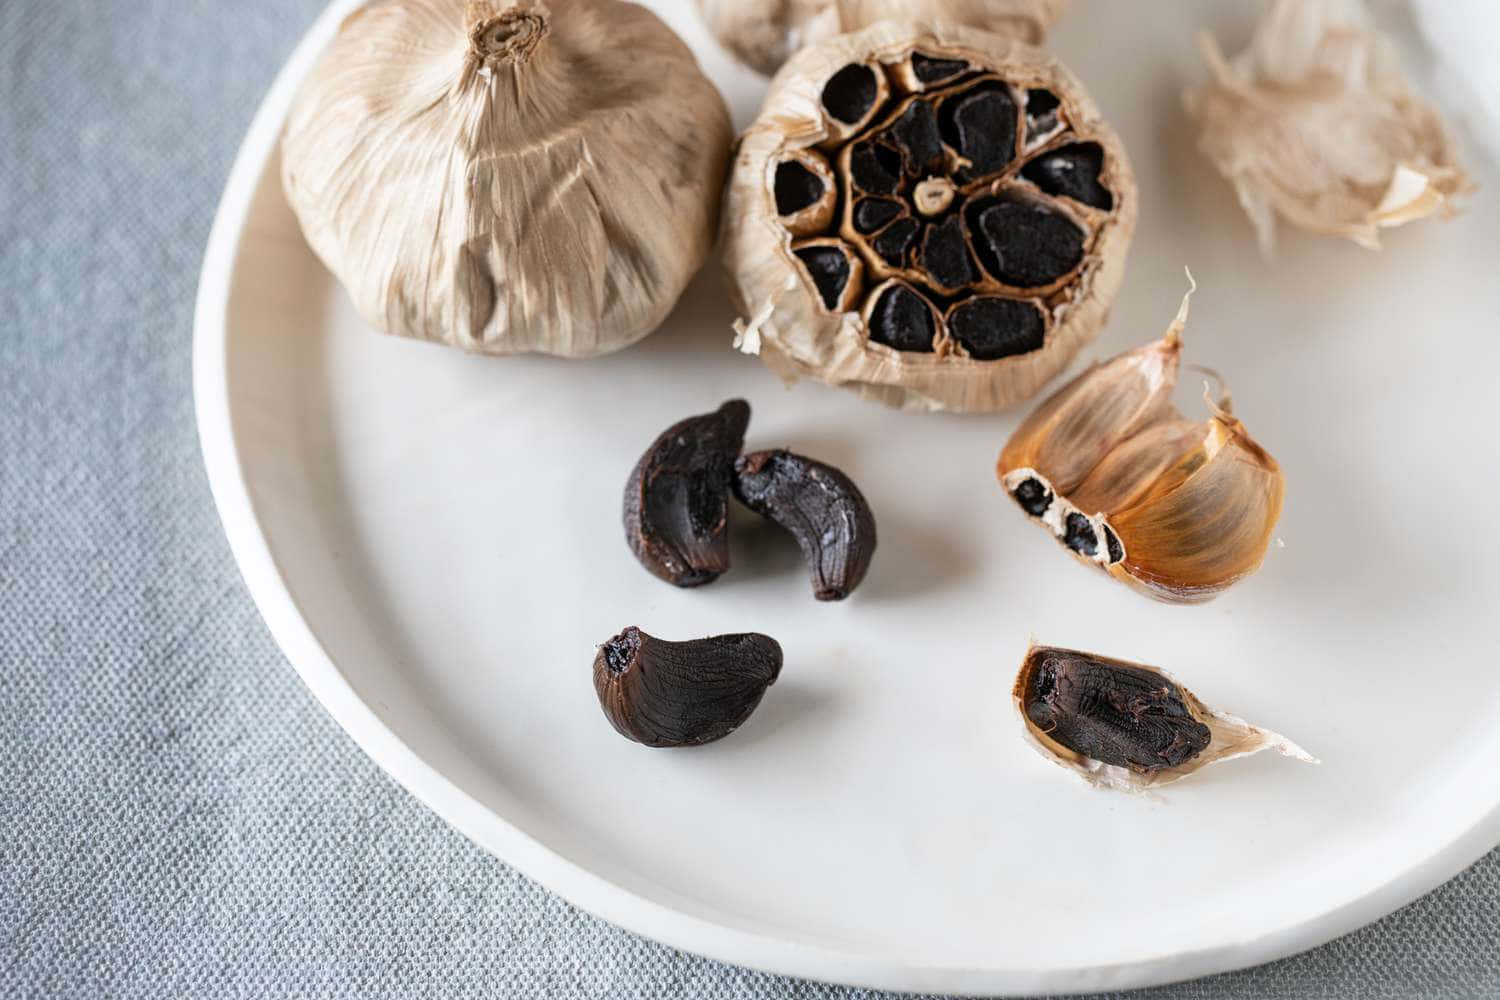 Rich and flavorful black garlic adds a unique taste to any meal. Wallpaper